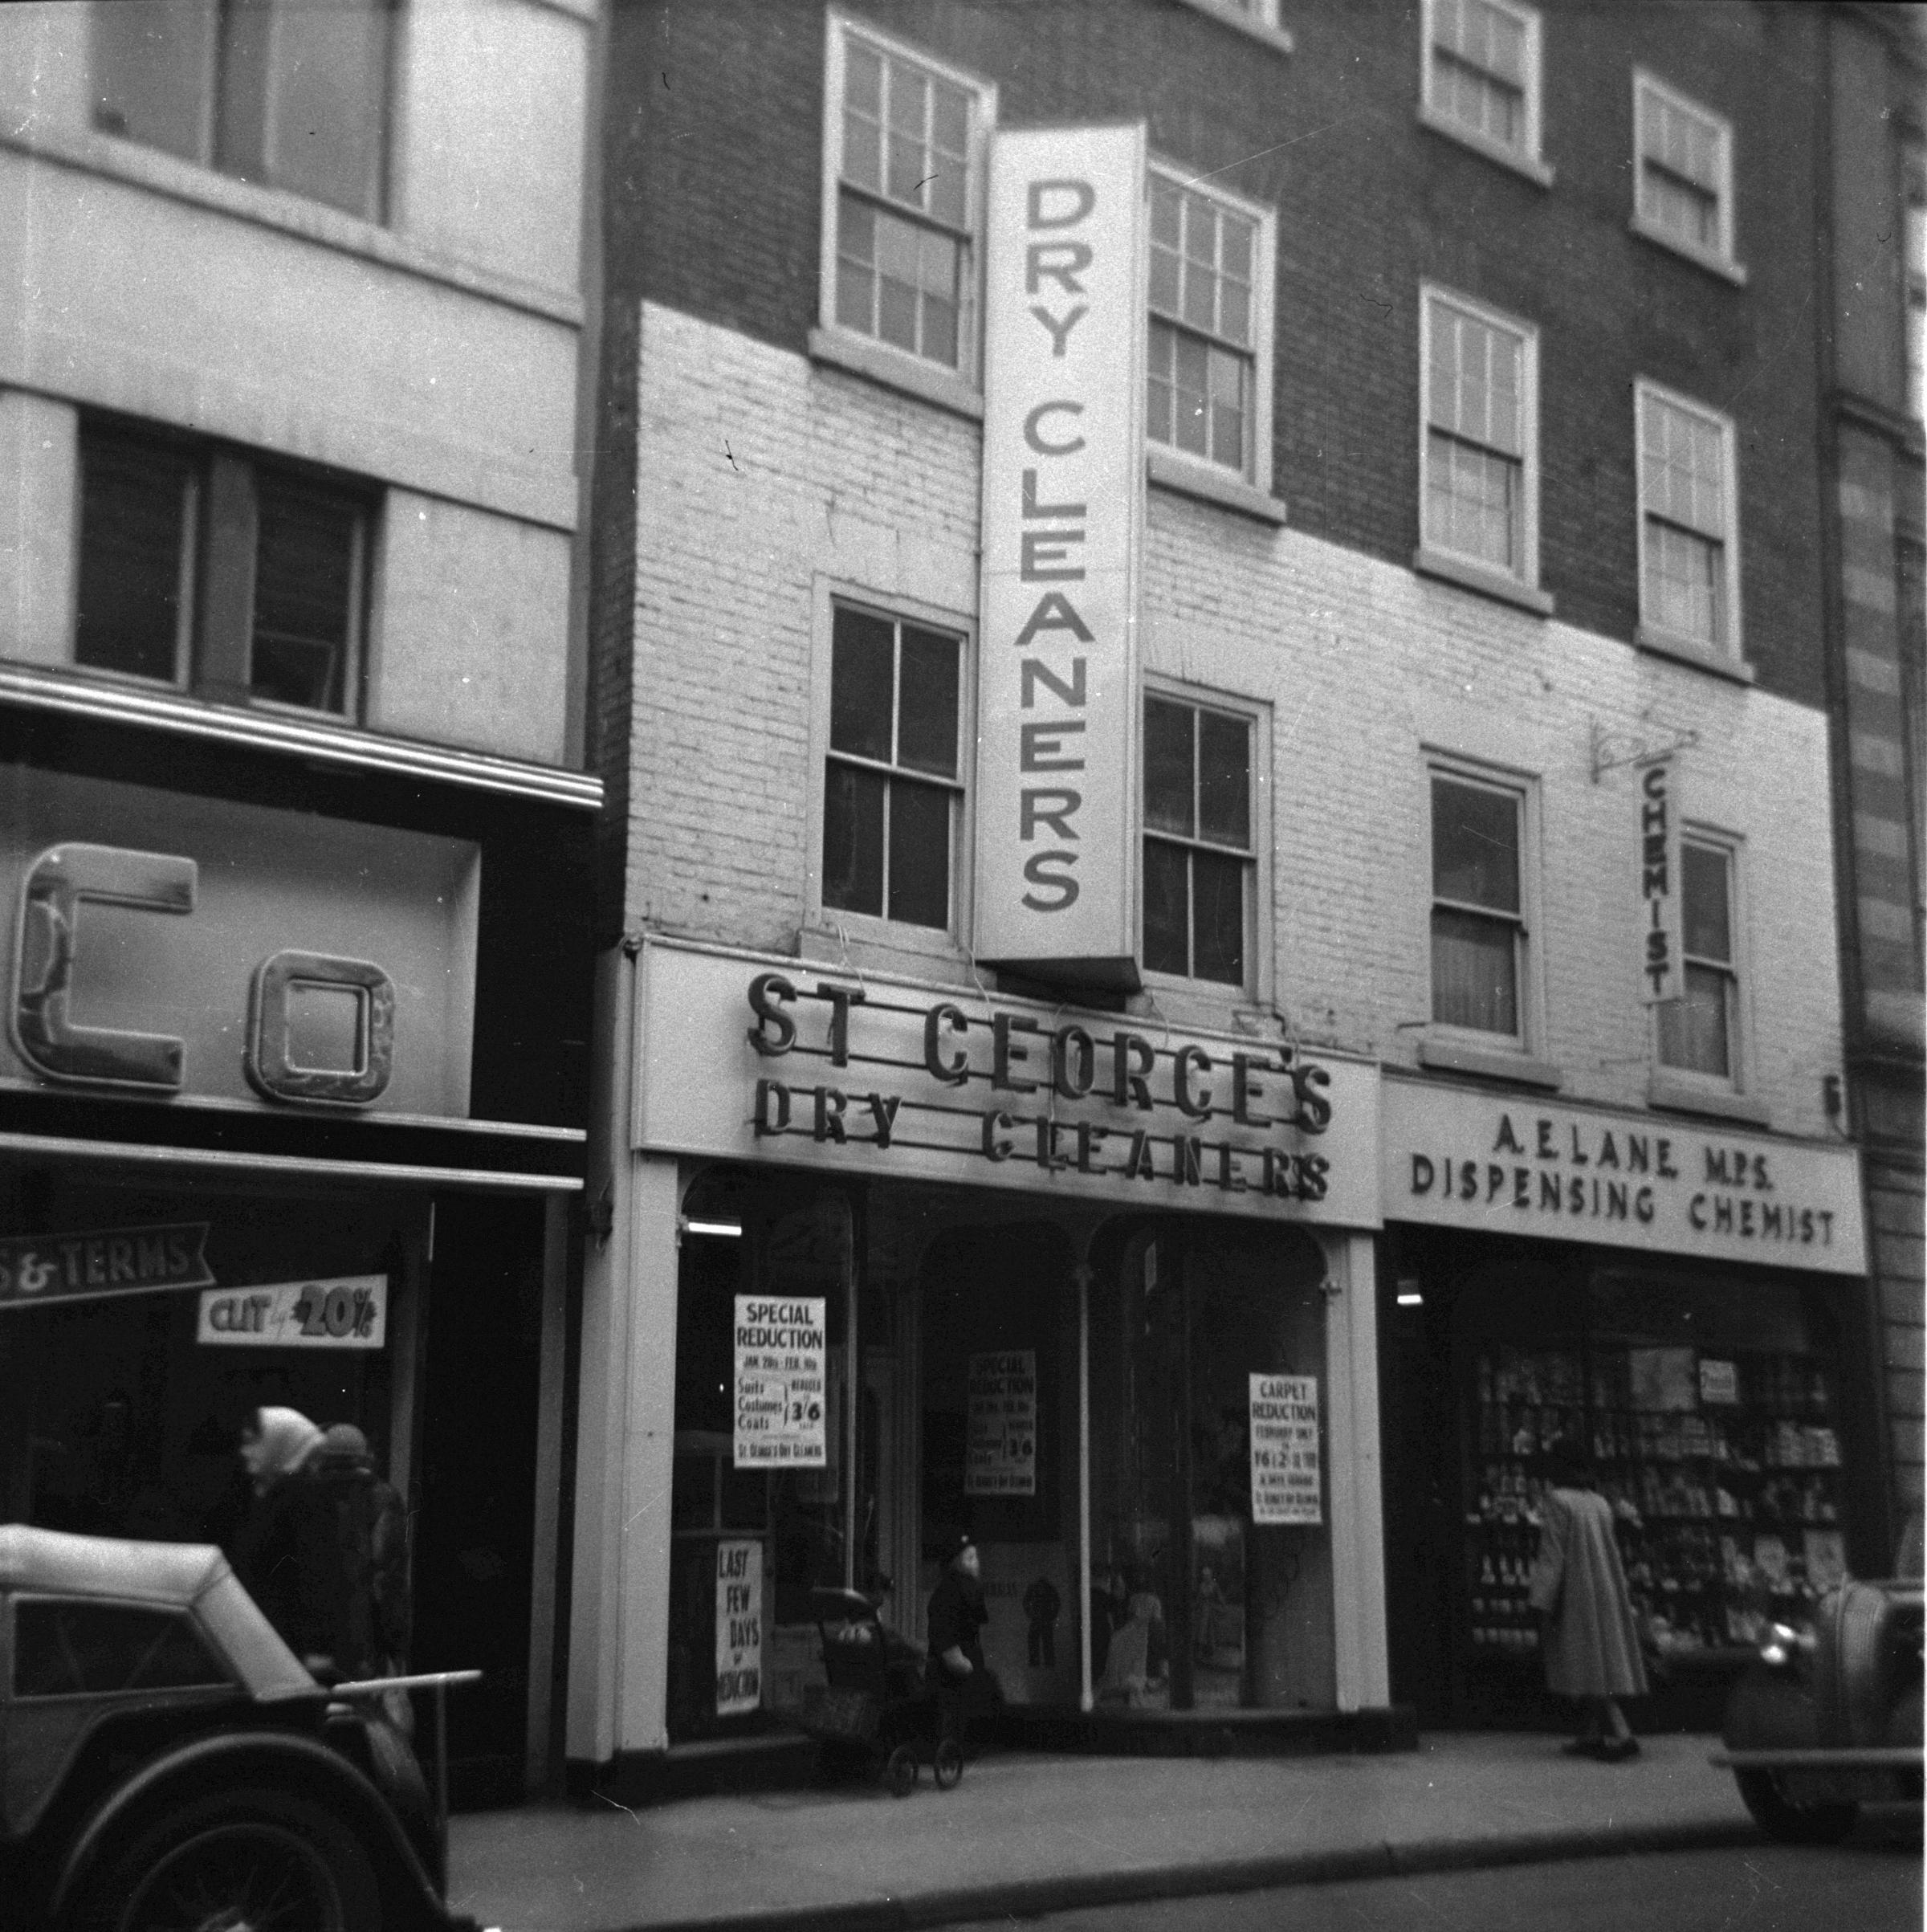 St George’s Dry Cleaners in St Swithin’s Street, in the 1950s. Hardy & Co furniture shop was to the left and on the right, A E Lane Dispensing chemist